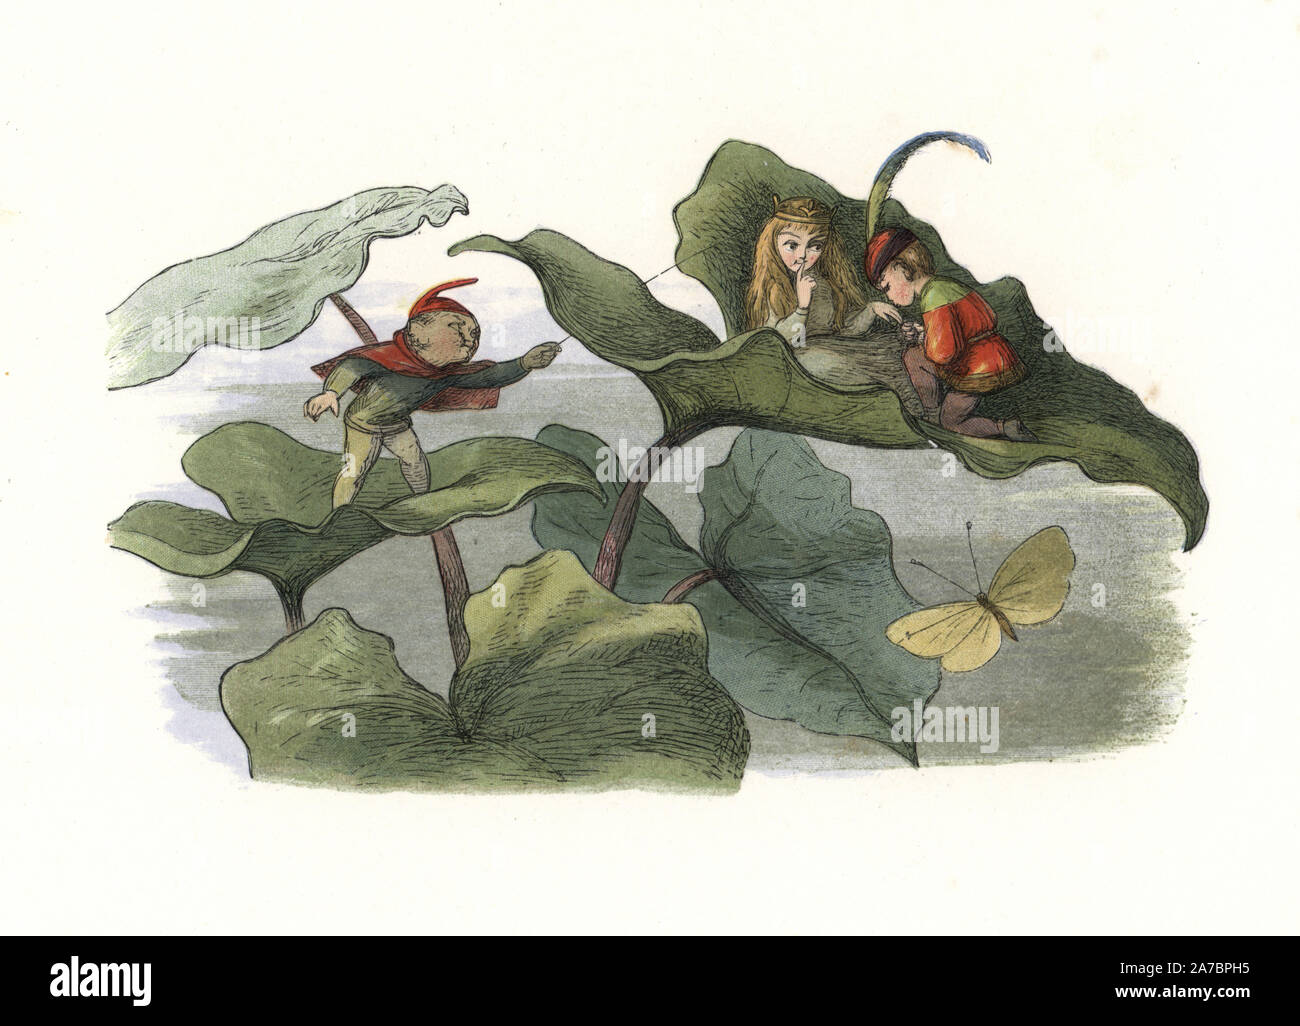 An elf courting a fairy on a leaf is interrupted by another elf. Handcoloured woodblock print by Edmund Evans after an illustration by Richard Doyle from In Fairyland, a series of Pictures from the Elf World, Longman, London, 1870. Stock Photo